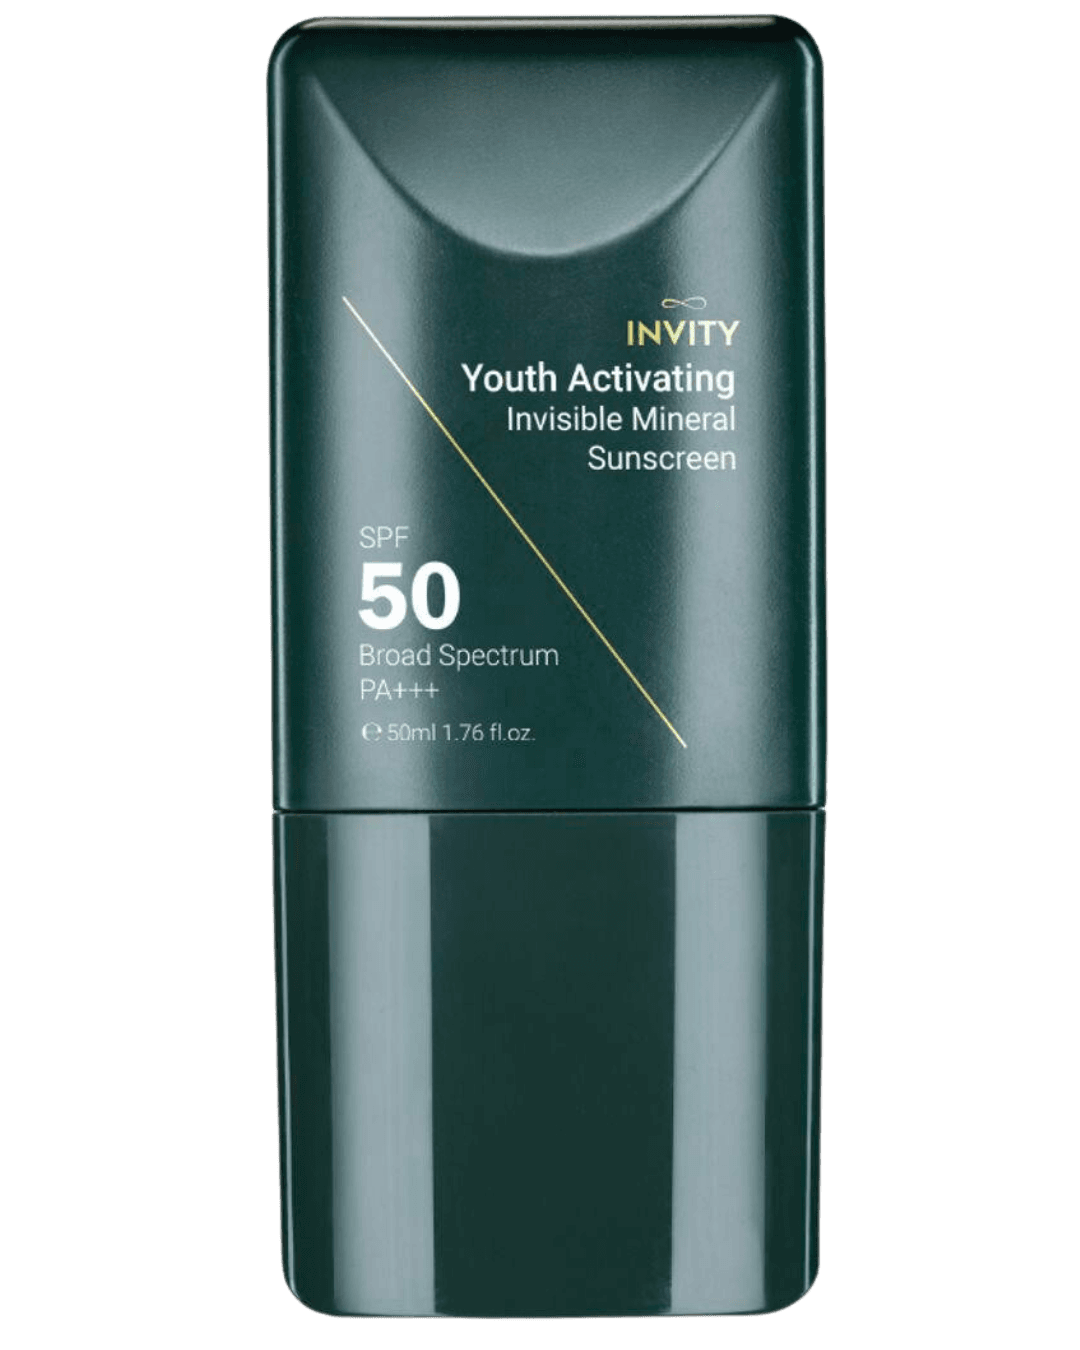 Invity Youth Activating Invisible Mineral Sunscreen